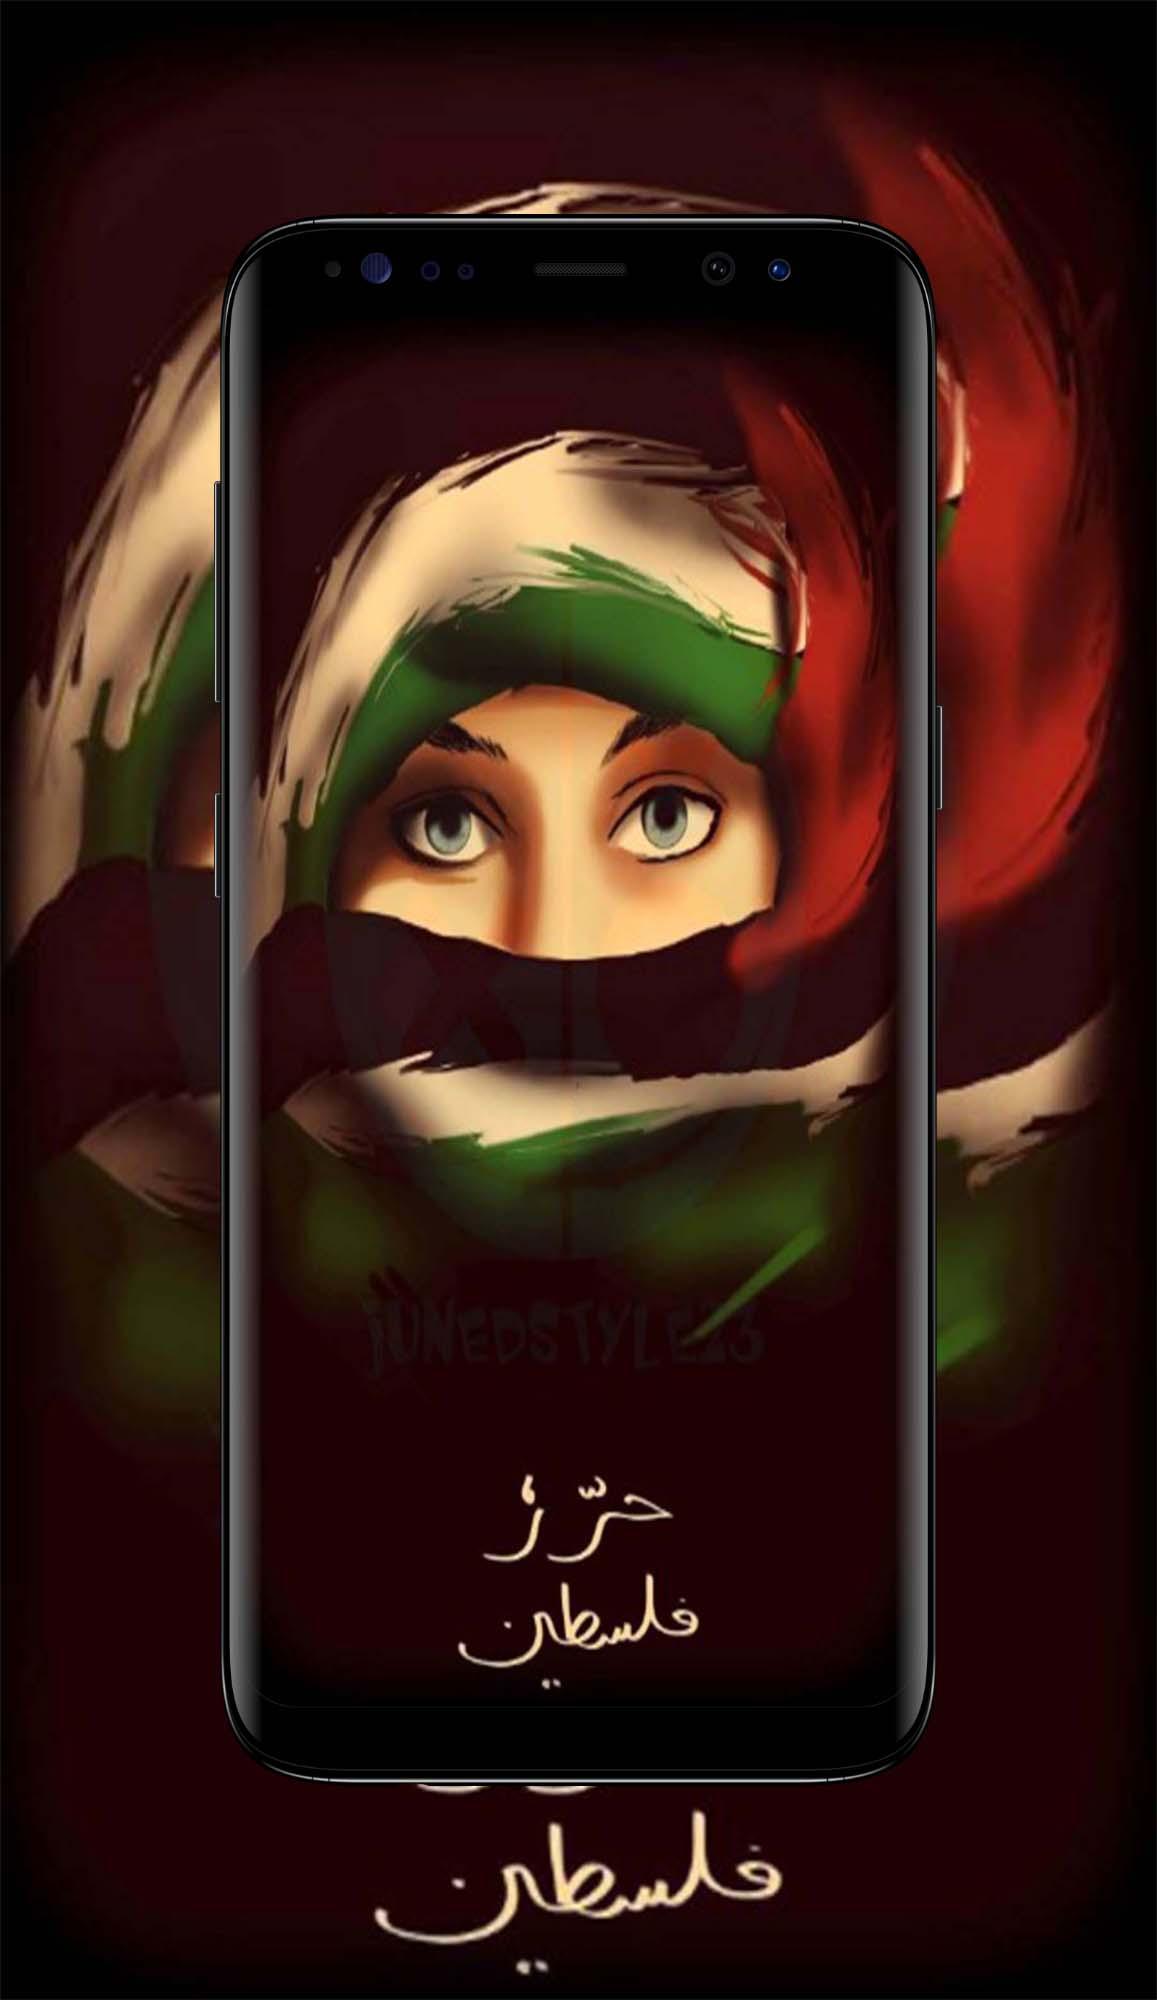 Palestine Wallpaper Hd For Android Apk Download